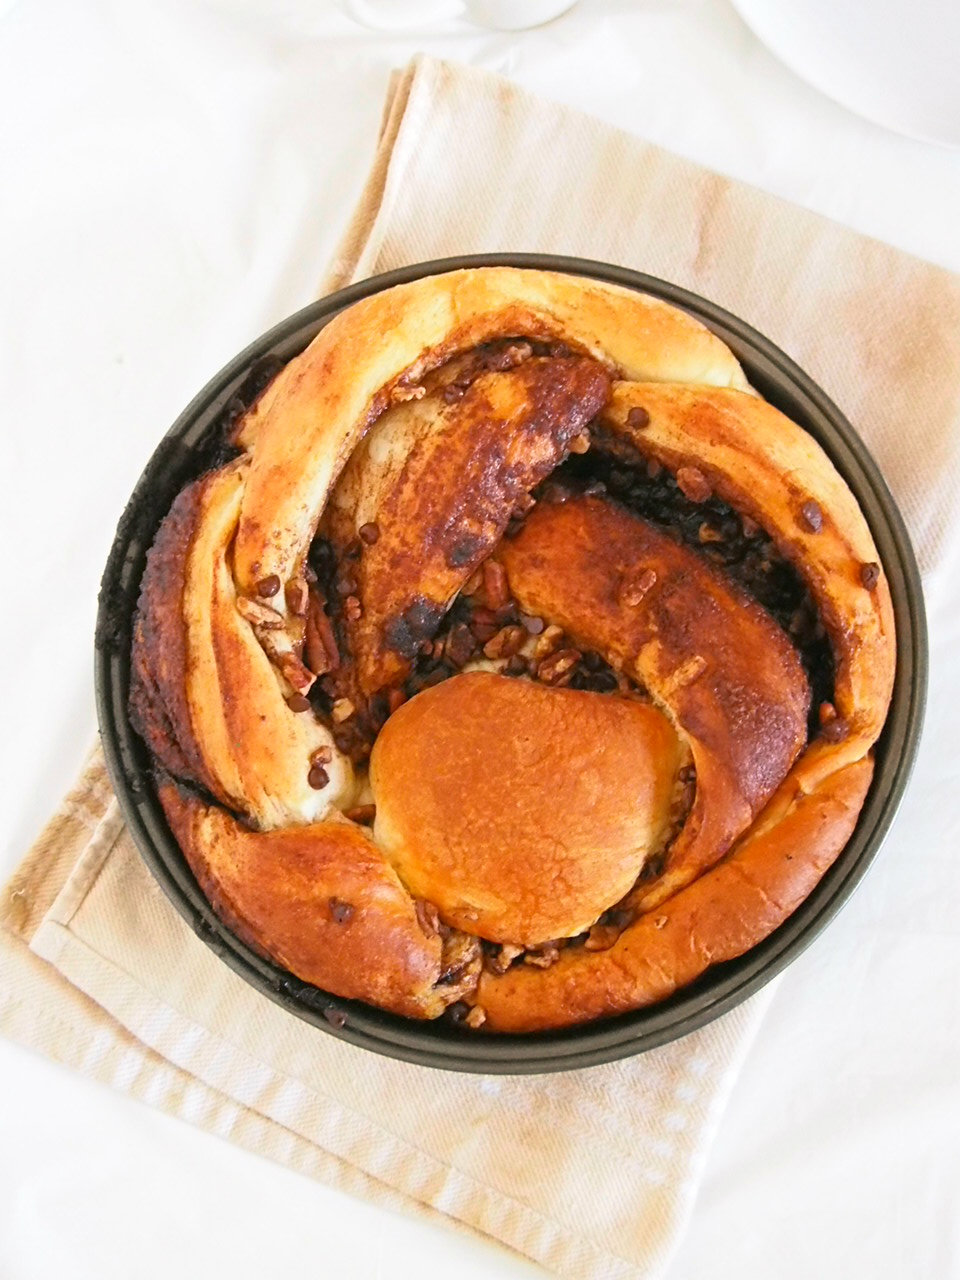 This Chocolate Pecan Cinnamon Bread is a soft, tasty bread braided with a delightful mixture of cinnamon sugar, cocoa, chocolate chips and pecan nuts. The addictive flavor and the soft texture of bread will have you pulling out a piece of this bread one after another.